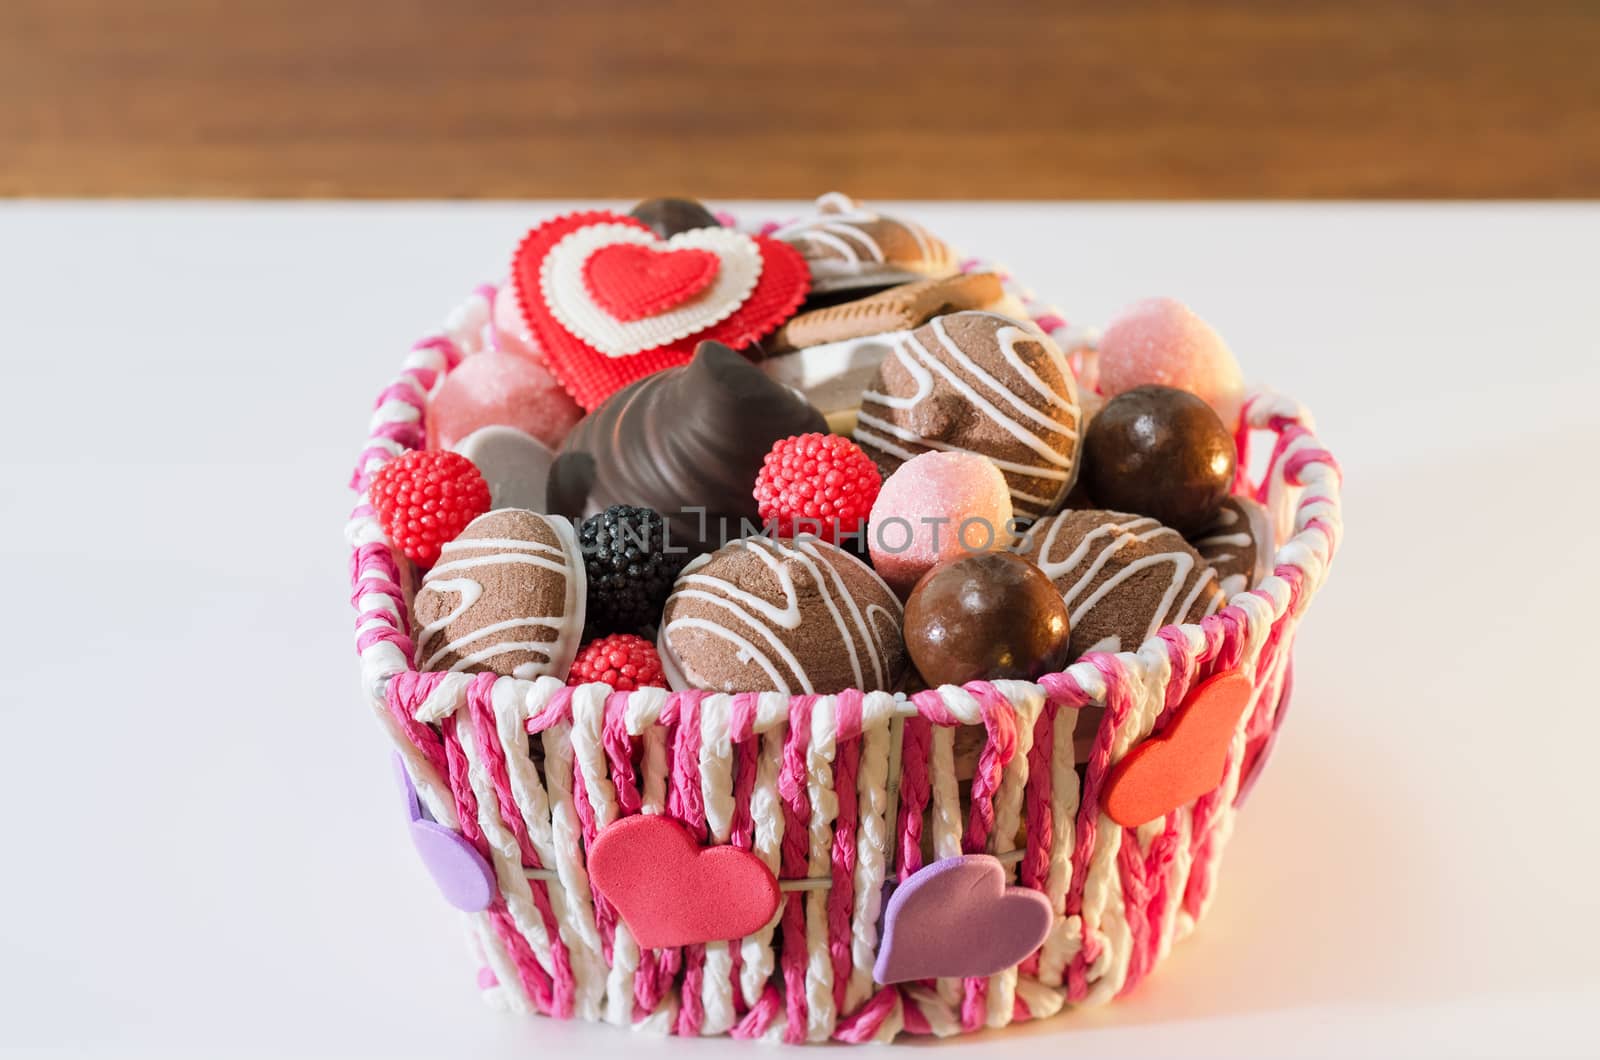 Sweets, biscuits and decorative hearts for Valentine's day in the basket. Selective focus, space for text. by Gaina